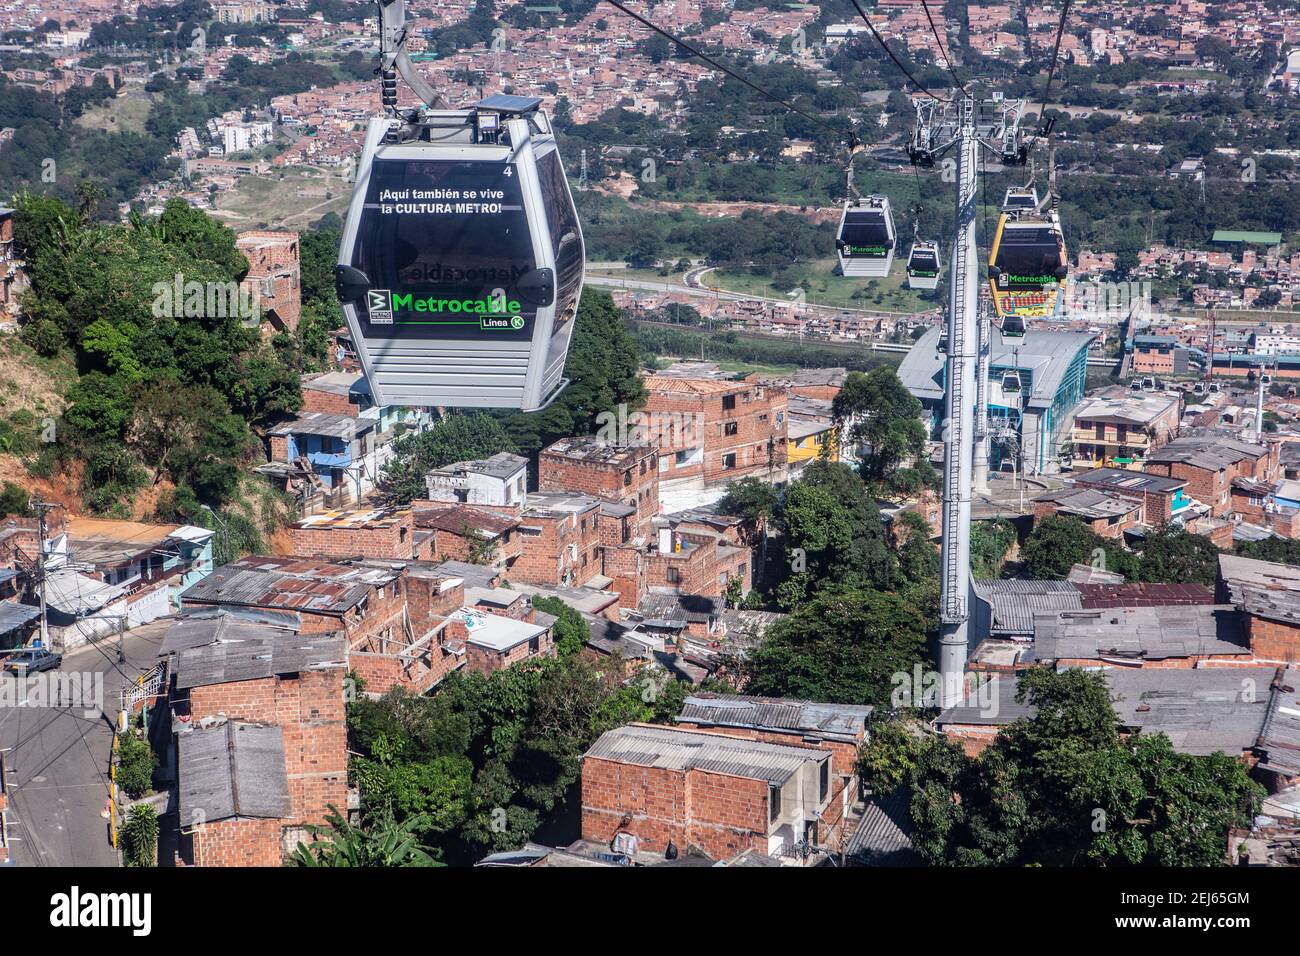 Colombia Medellin Metrocable cable car in Medellin Stock Photo